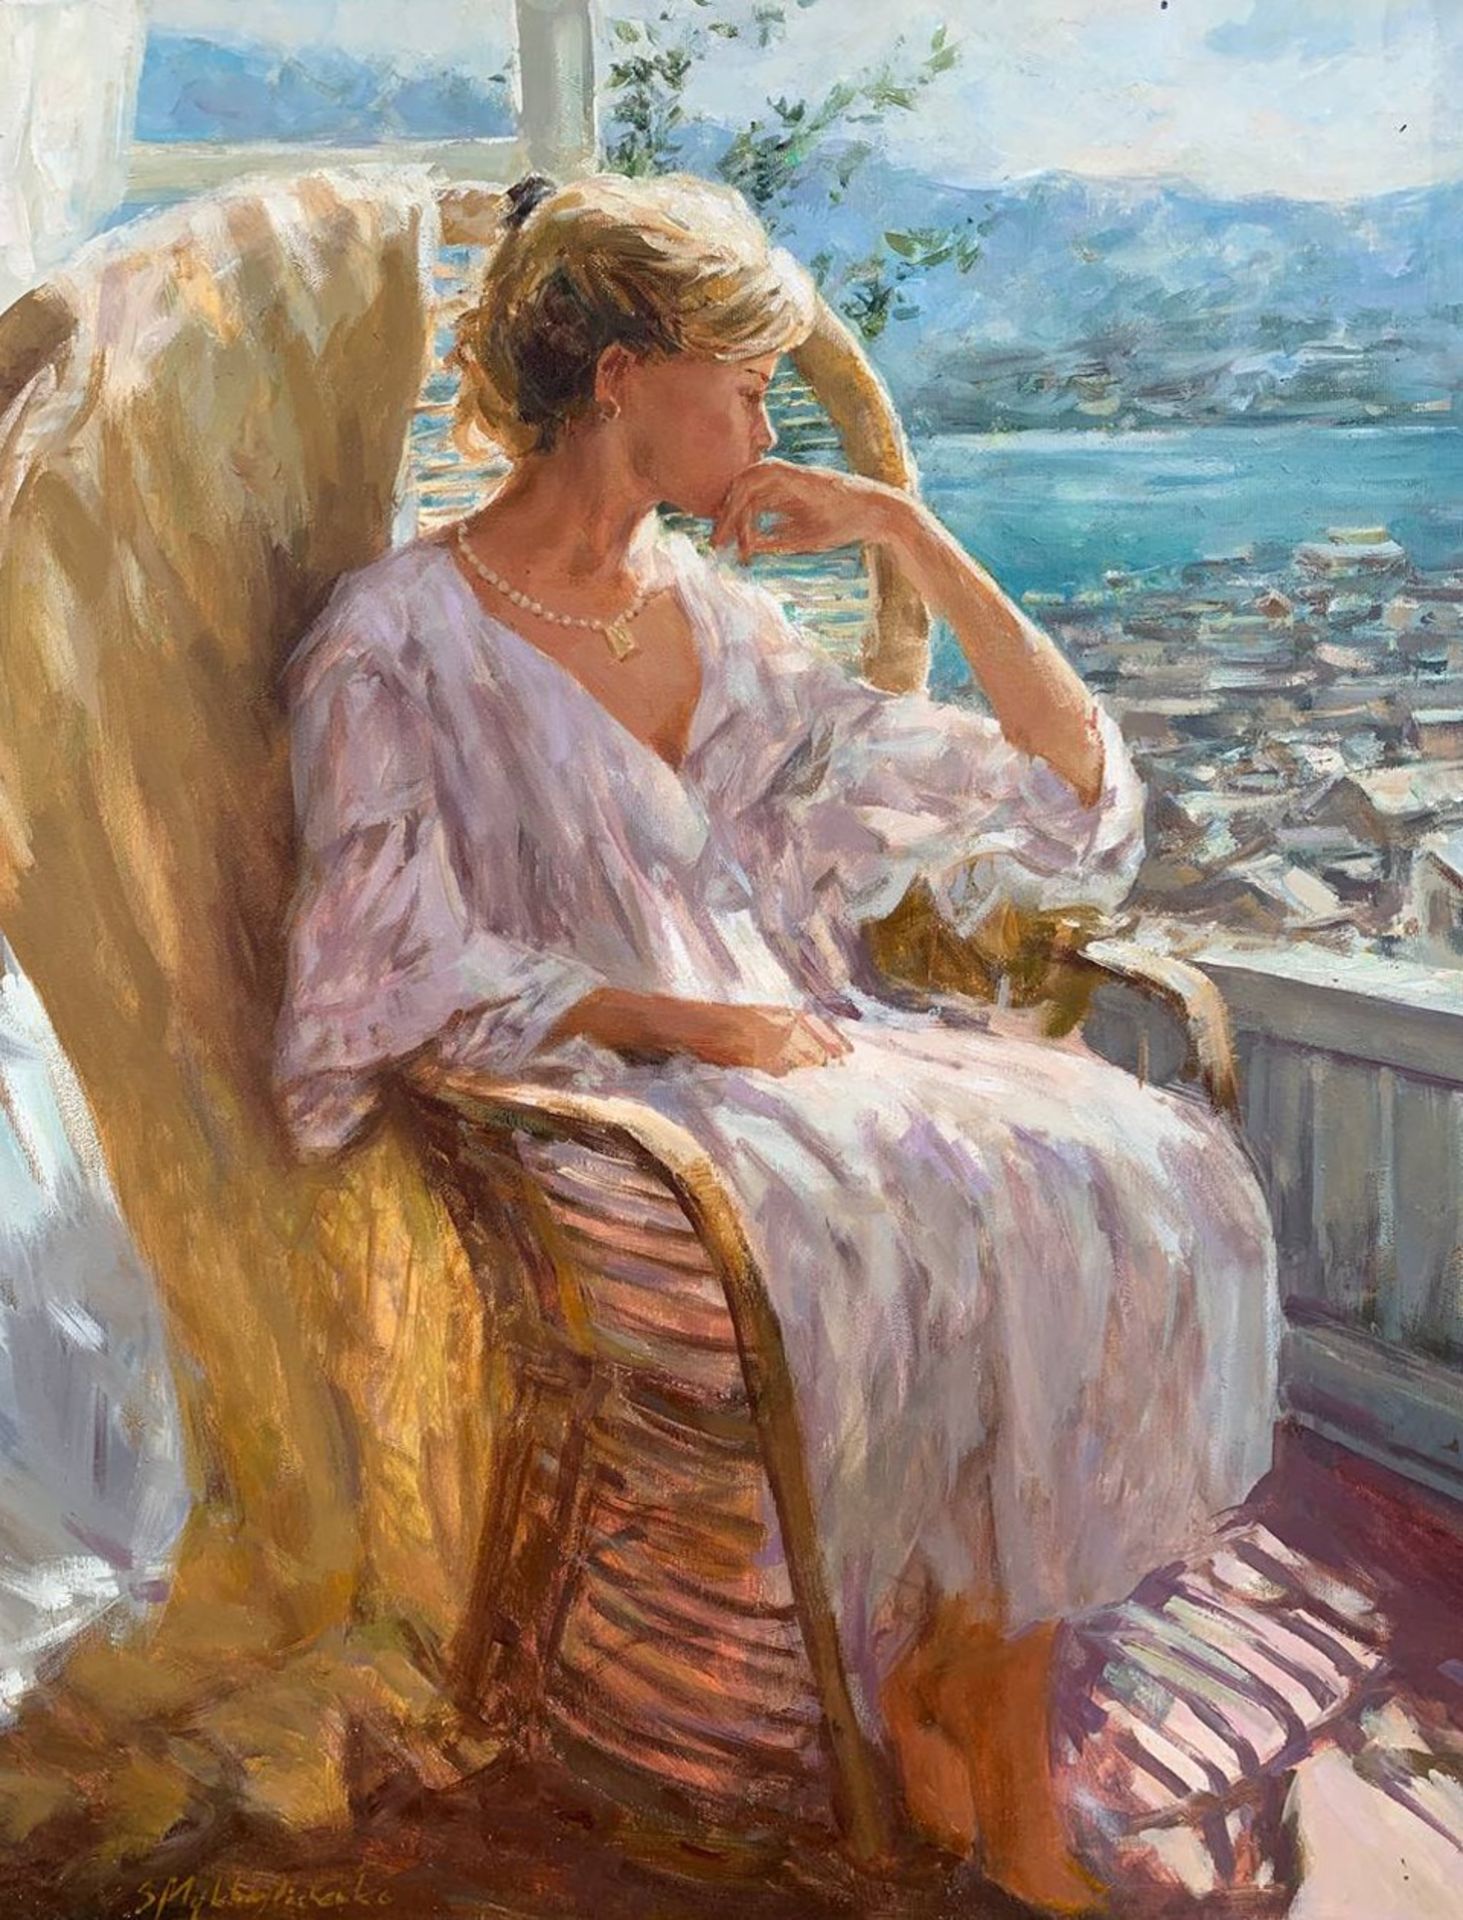 Oil painting By the window at noon Mikhailichenko Sergey Viktorovich. "№1559 *** ABOUT THIS PAINTING